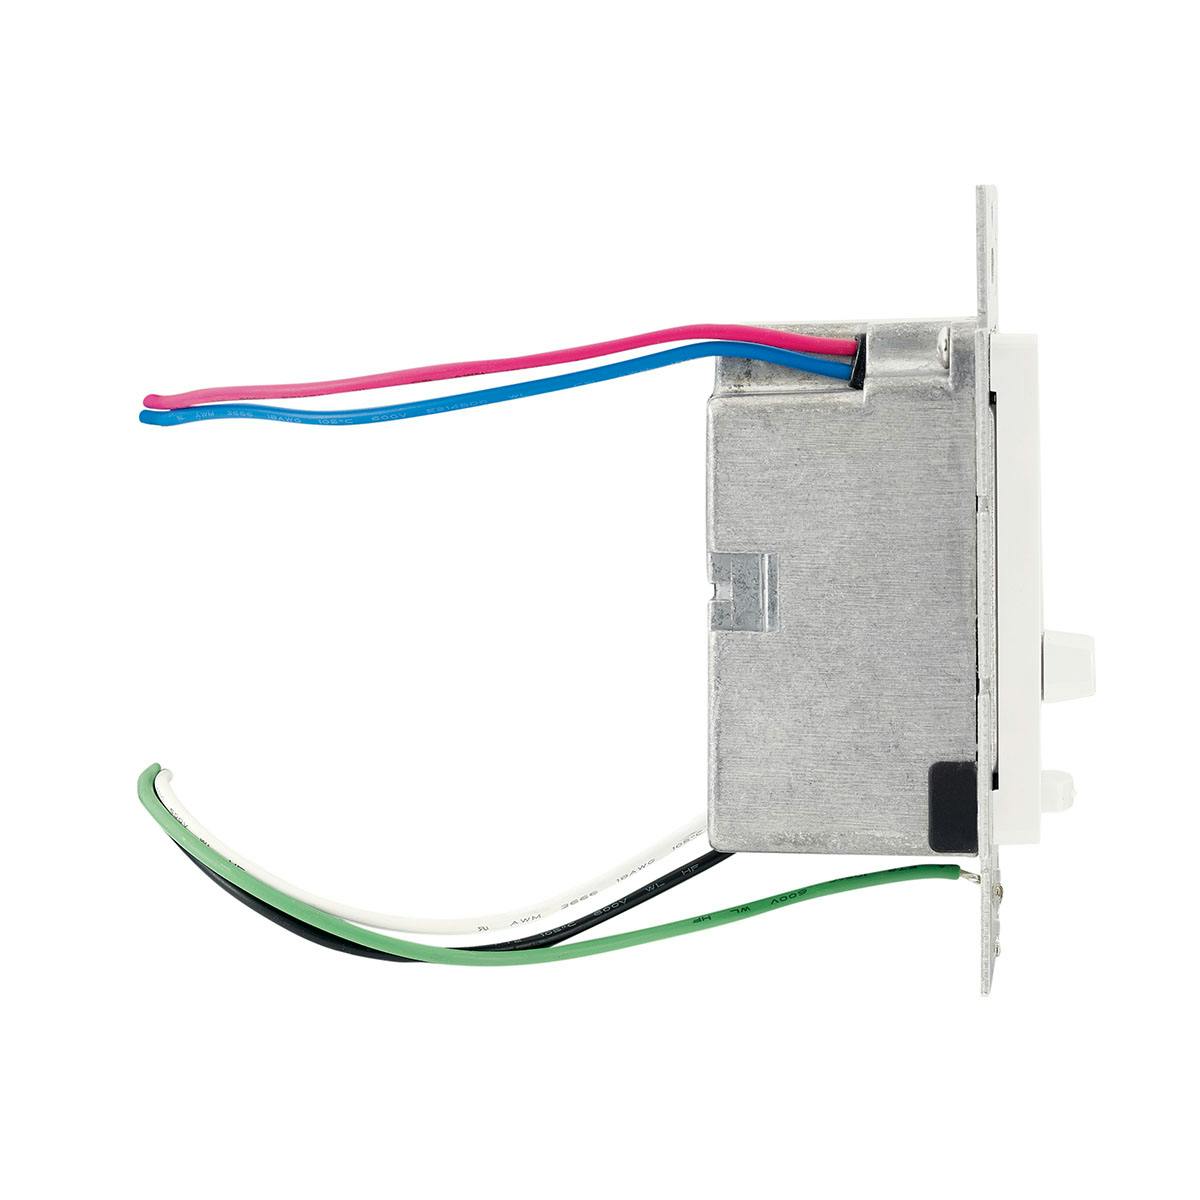 Profile view of the 4DD 12V LED Driver + Dimmer - 60W White on a white background